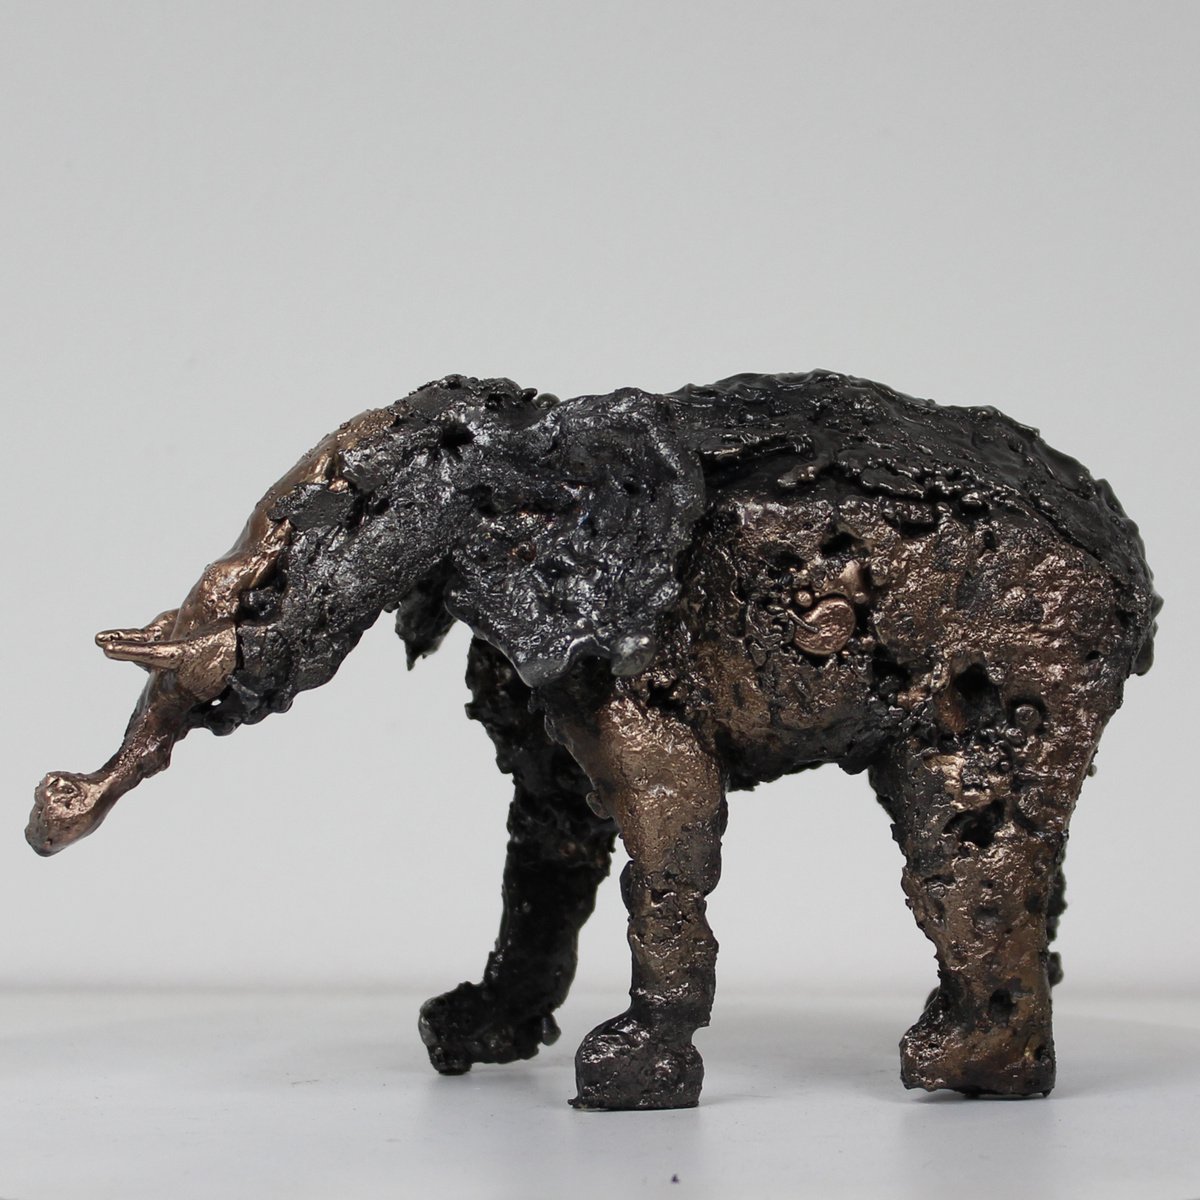 Elephant B - Metal animal sculpture - bronze and steel lace by Philippe Buil